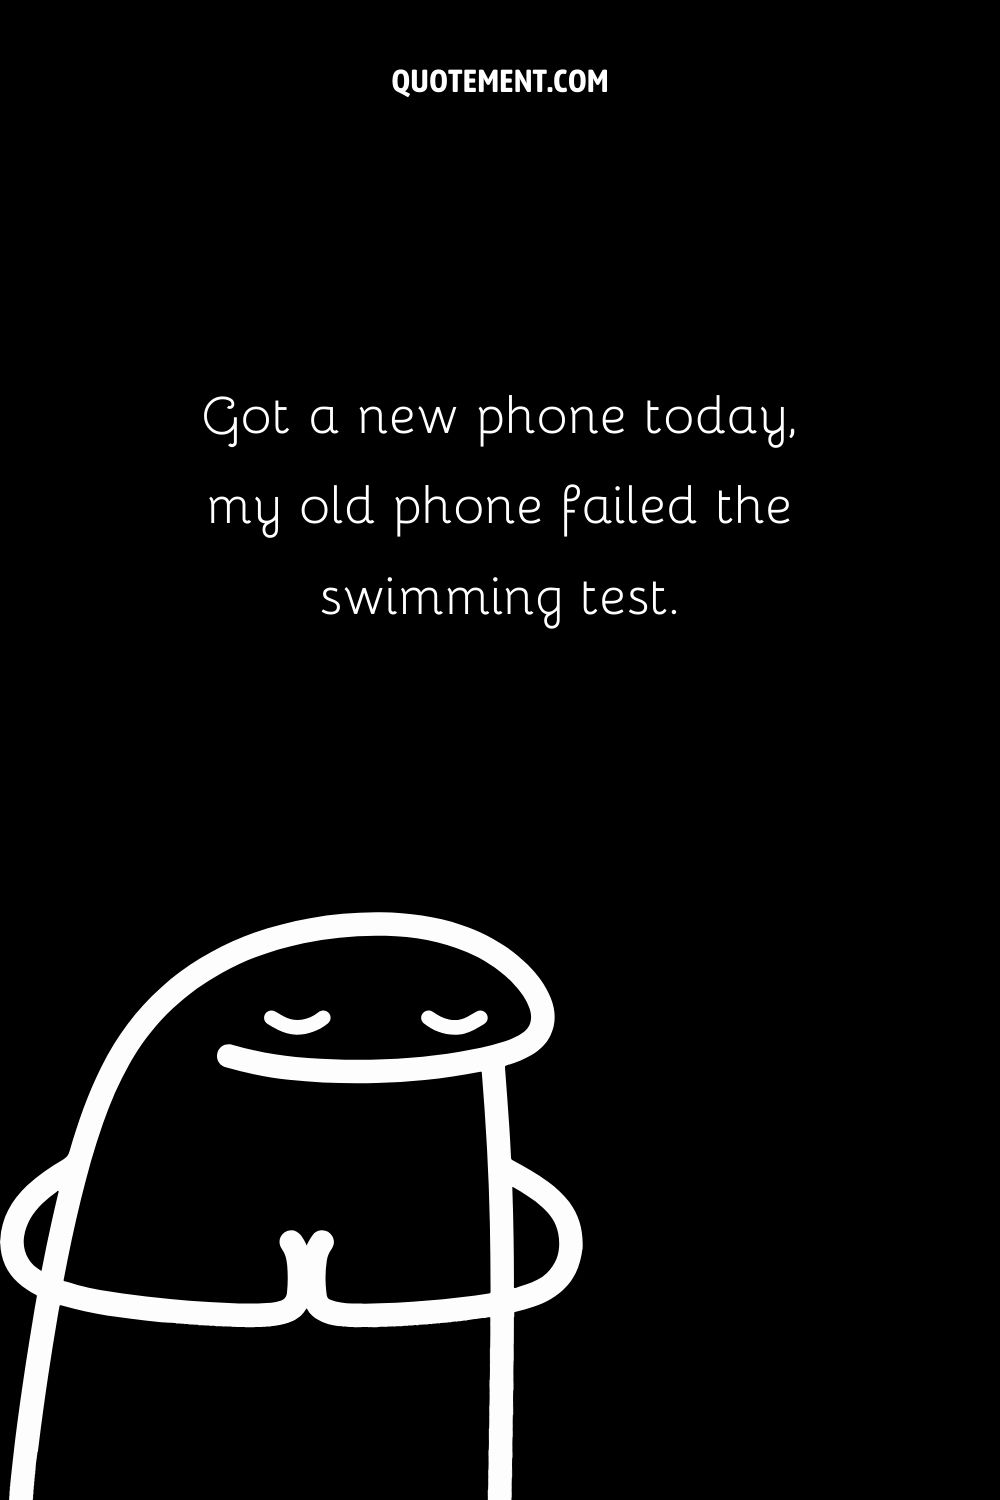 Got a new phone today, my old phone failed the swimming test.